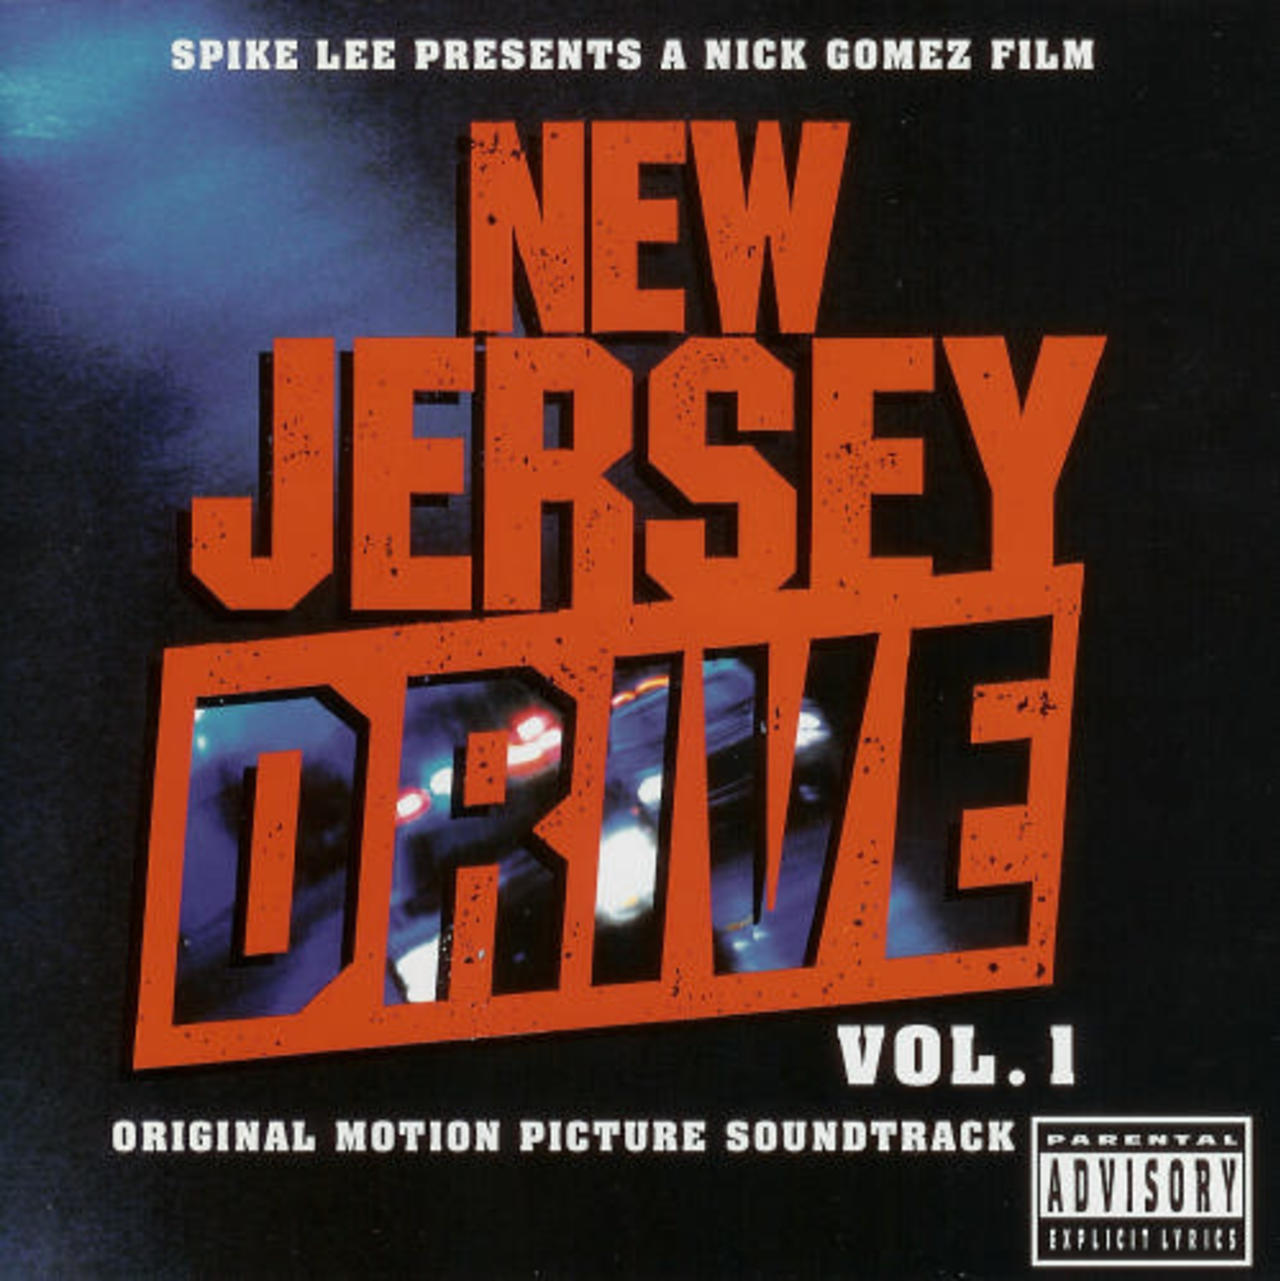 NEW JERSEY DRIVE, VOL. 1 (1995): "Can't You See," Total feat. the Notorious B.I.G.